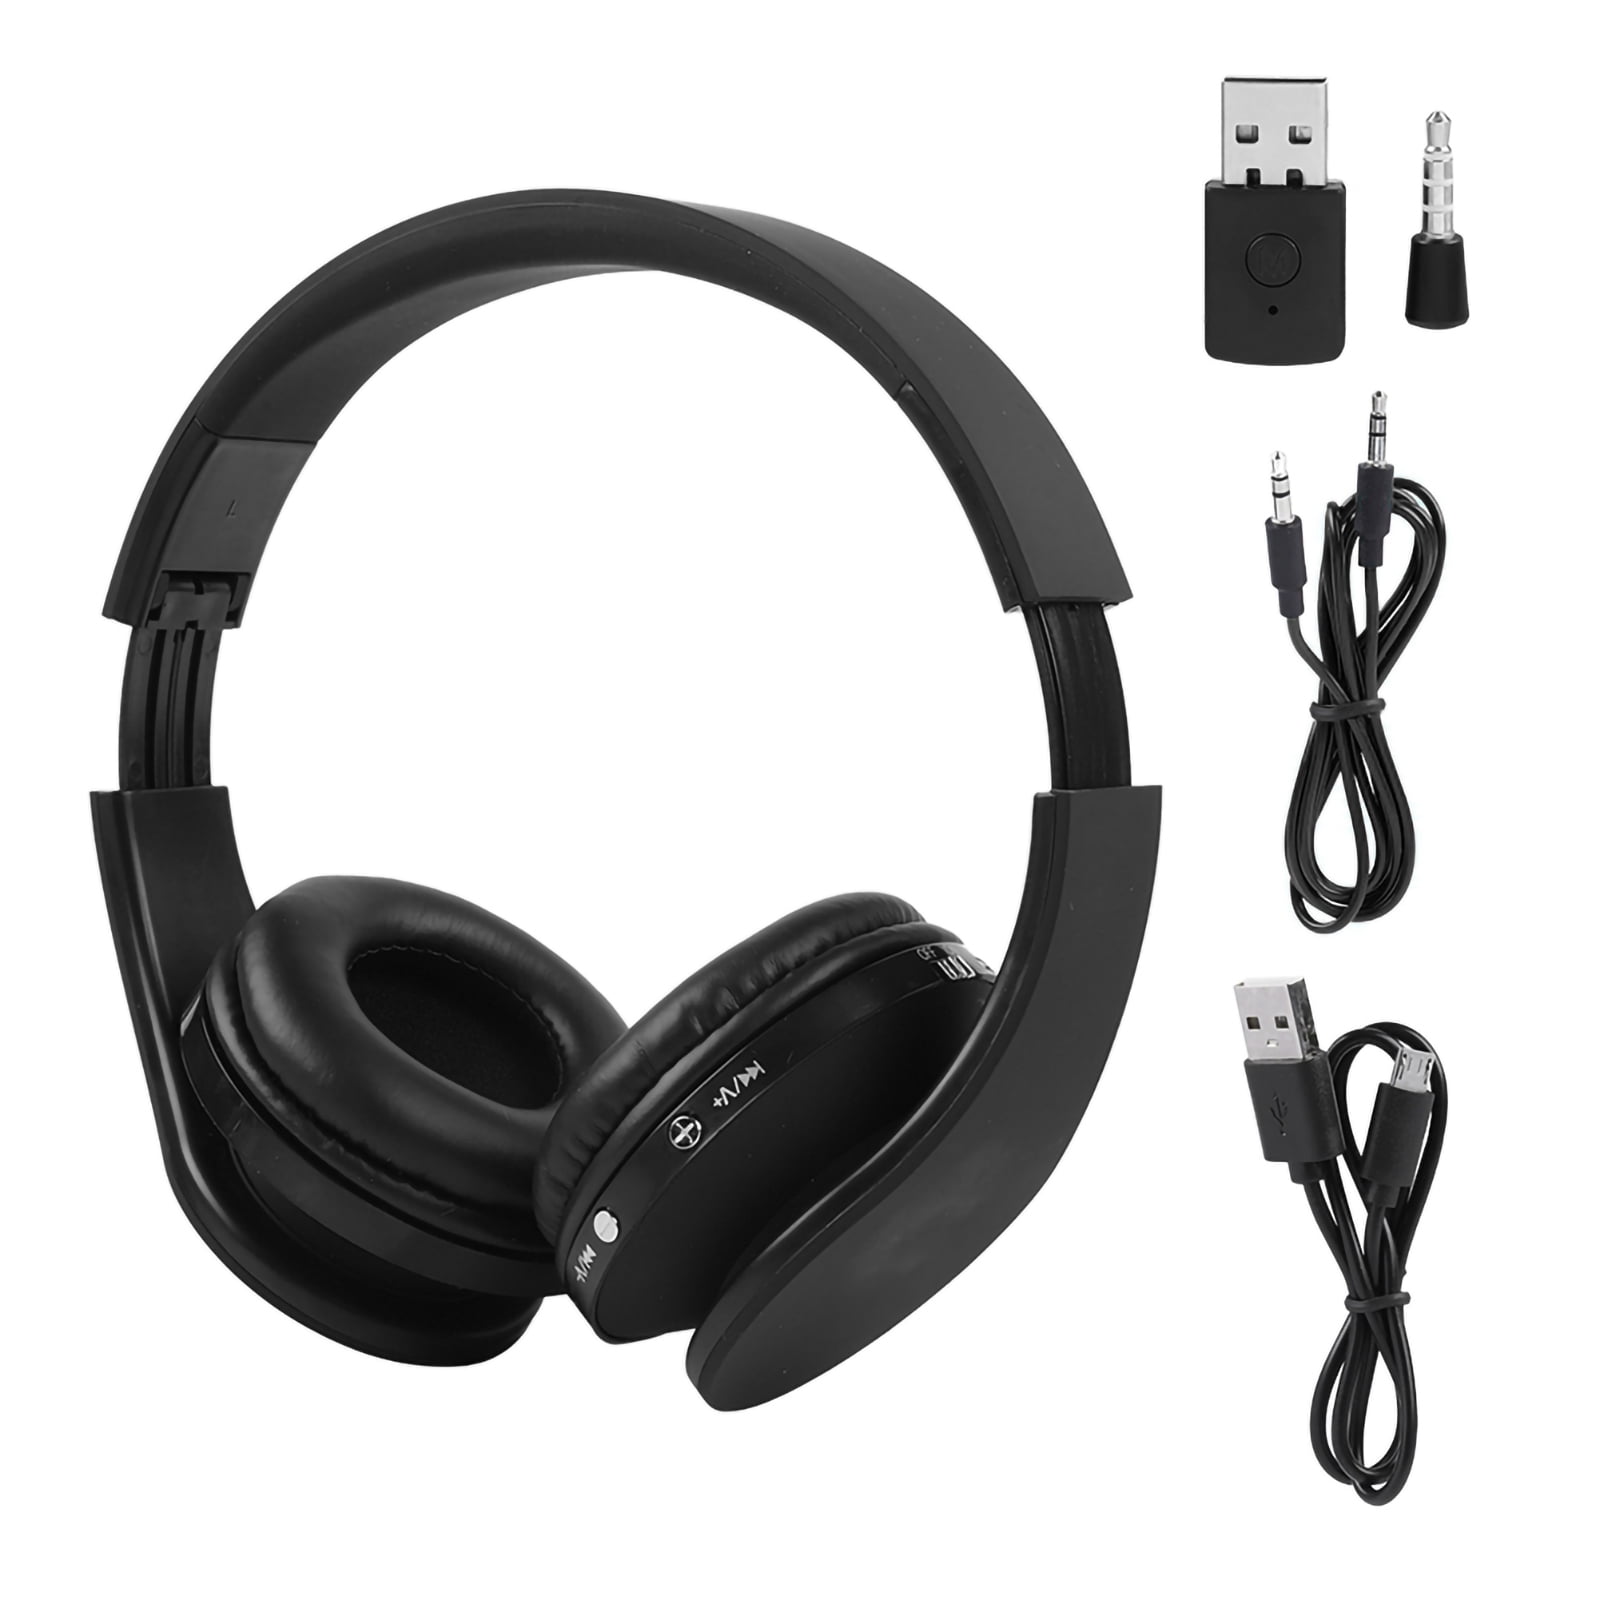 Portable 3.5mm Jack Wireless Bluetooth Foldable Stereo Headphone Gaming Headset for Sony PS4 PC Game Headphone Earphone